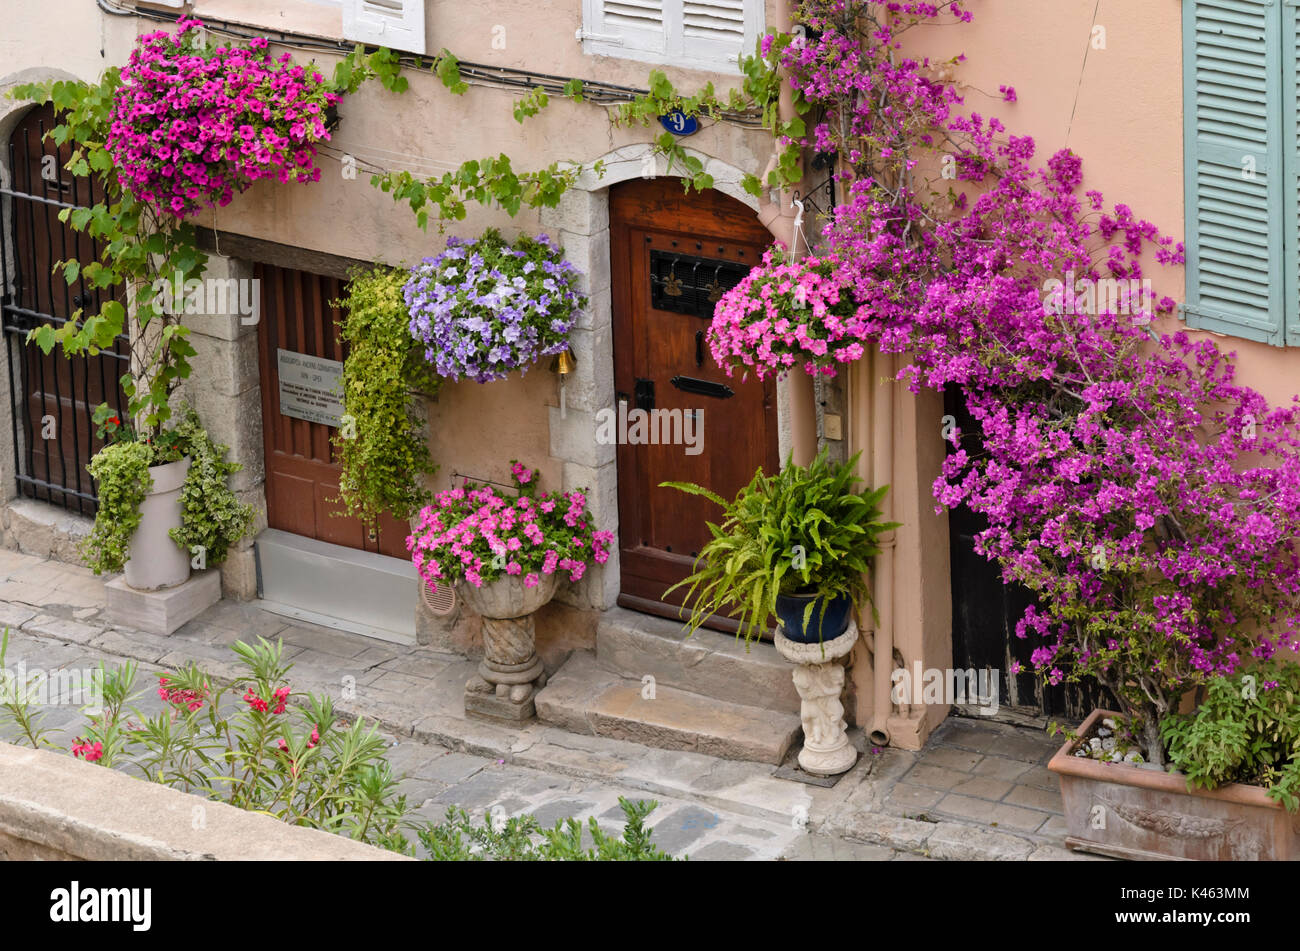 Bougainvillea and petunias (Petunia) in front of an old town house, Cannes, France Stock Photo